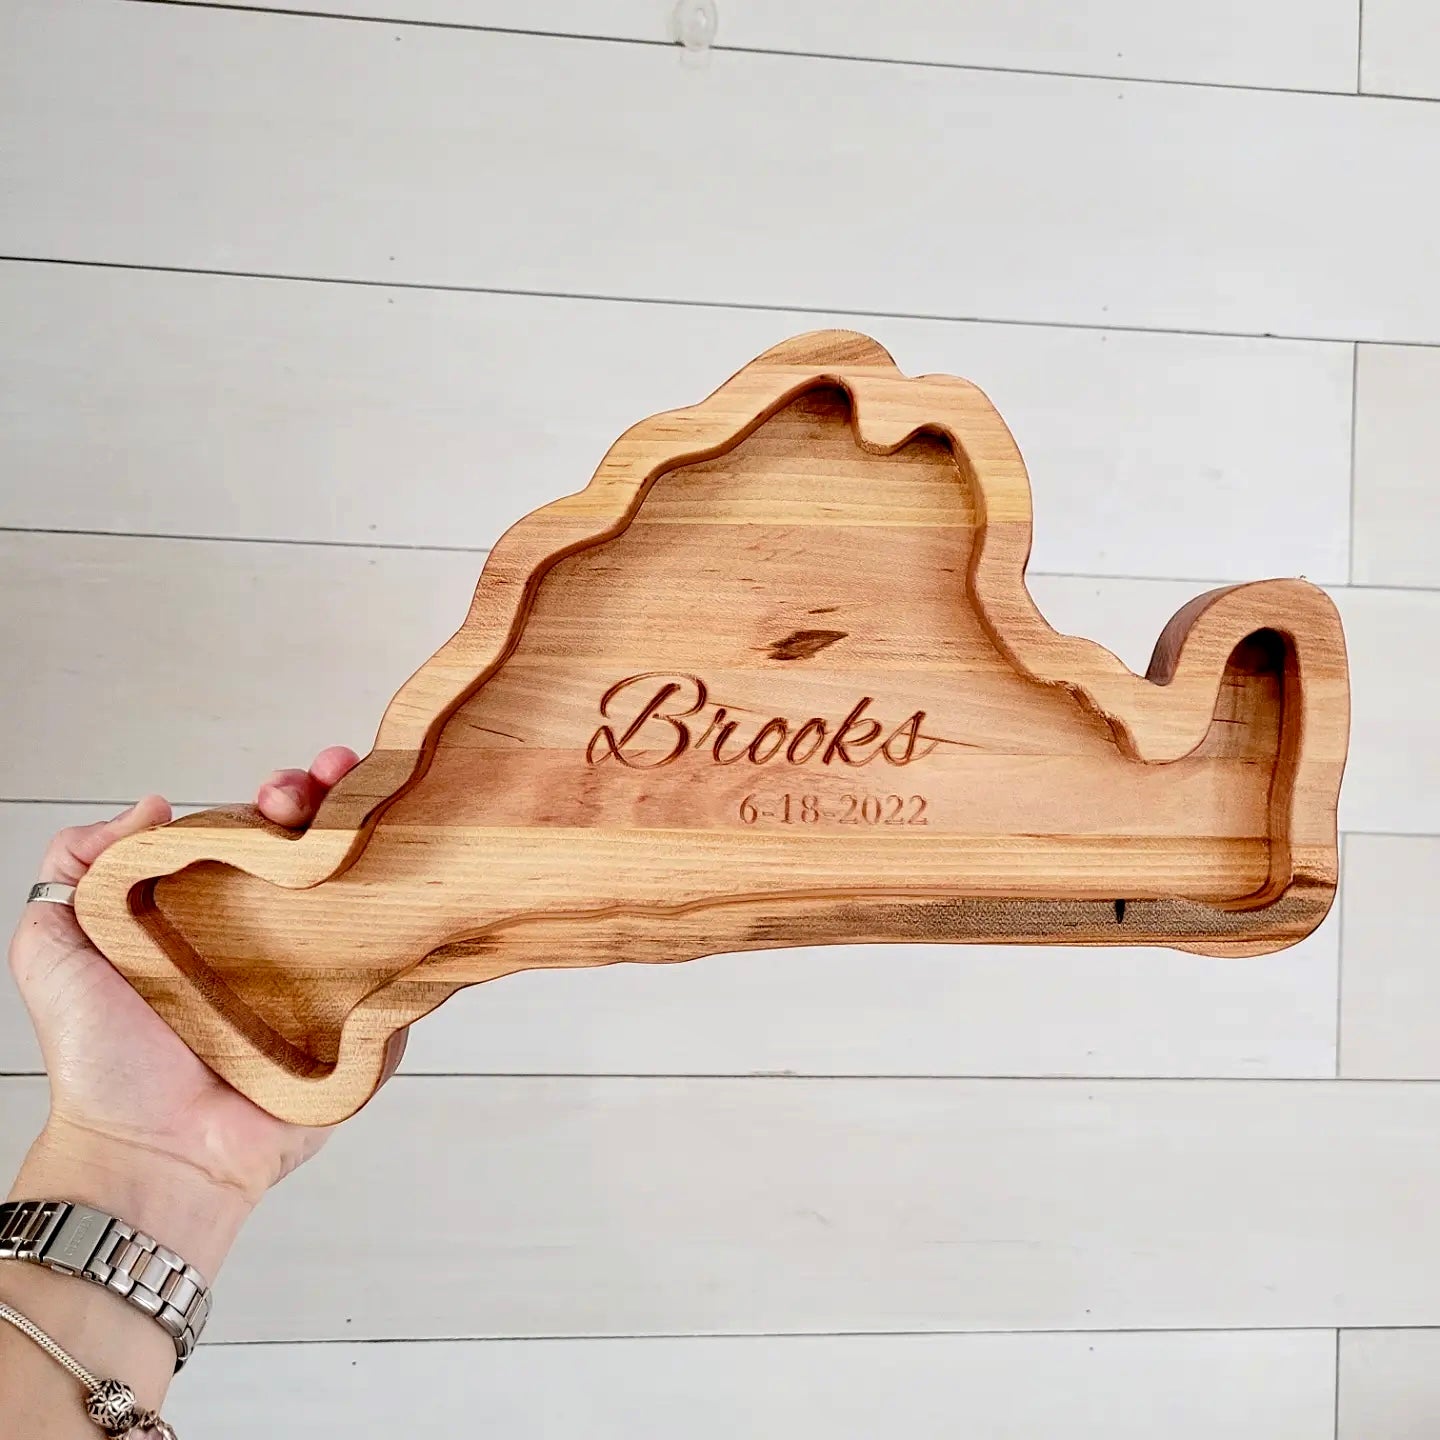 artha's Vineyard-shaped charcuterie board engraved with family name, showcasing fine craftsmanship and natural beauty